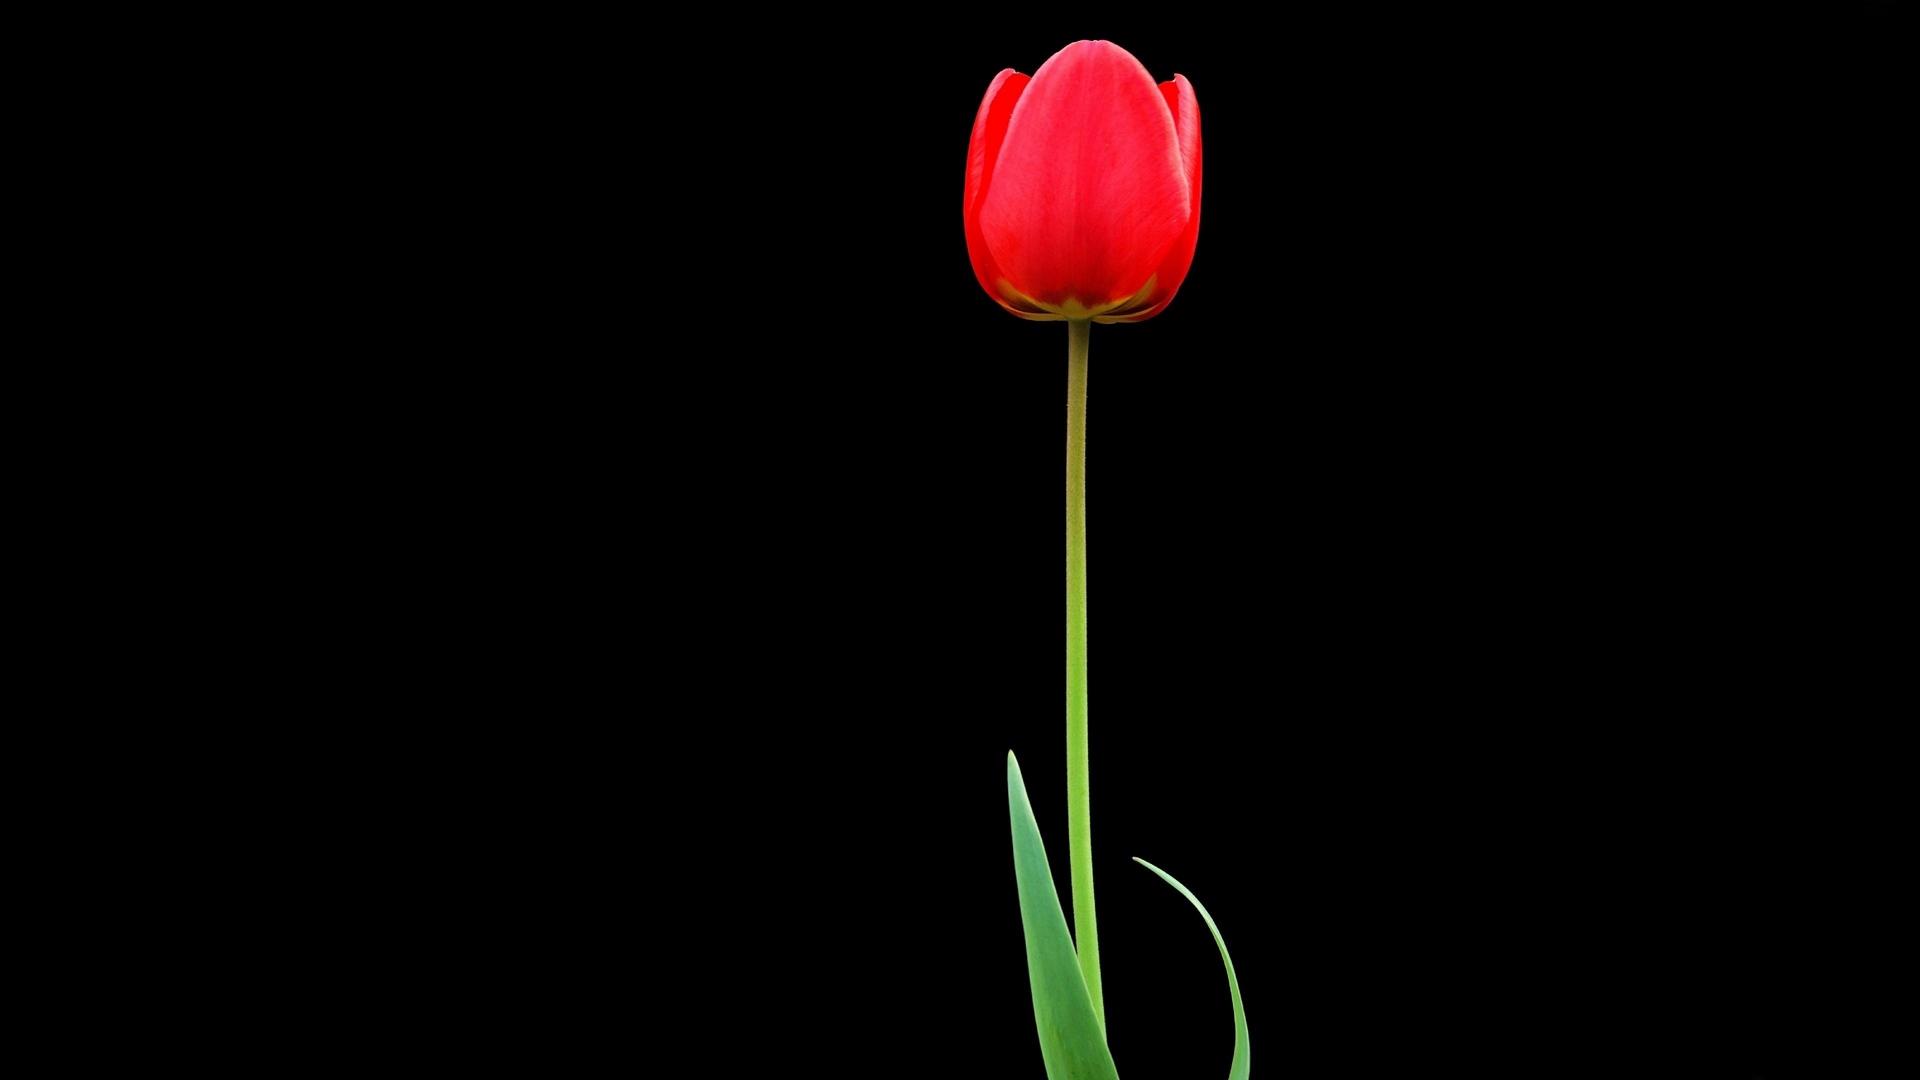 Black Background and One Tulip Wallpaper